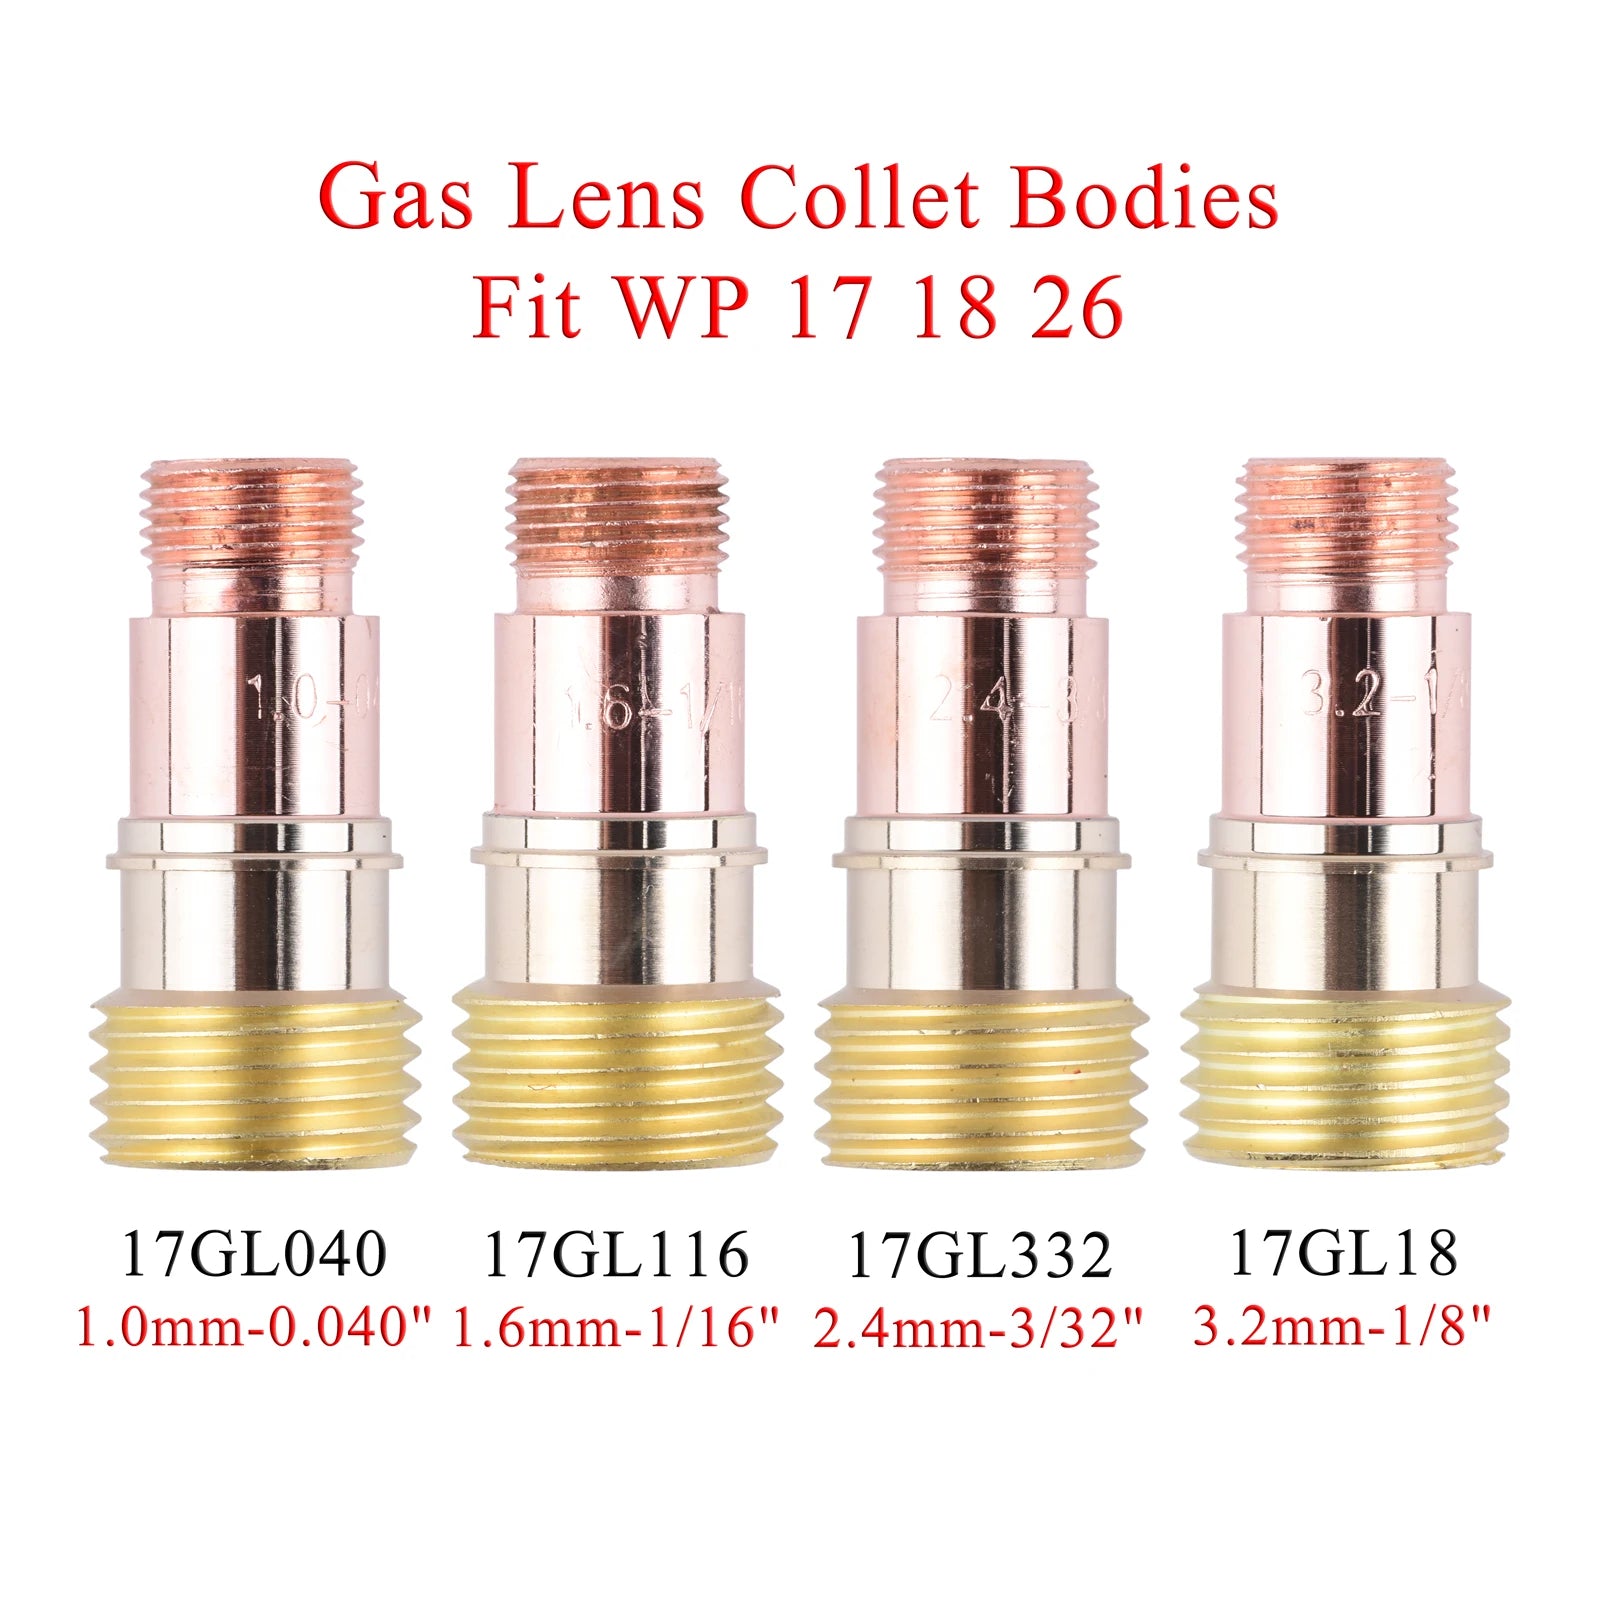 34Pcs TIG Welding Torch Accessories Stubby Gas Lens 4#~12# High Temperature Glass Cups Kit Fit WP17/18/26 Soldering Supplies